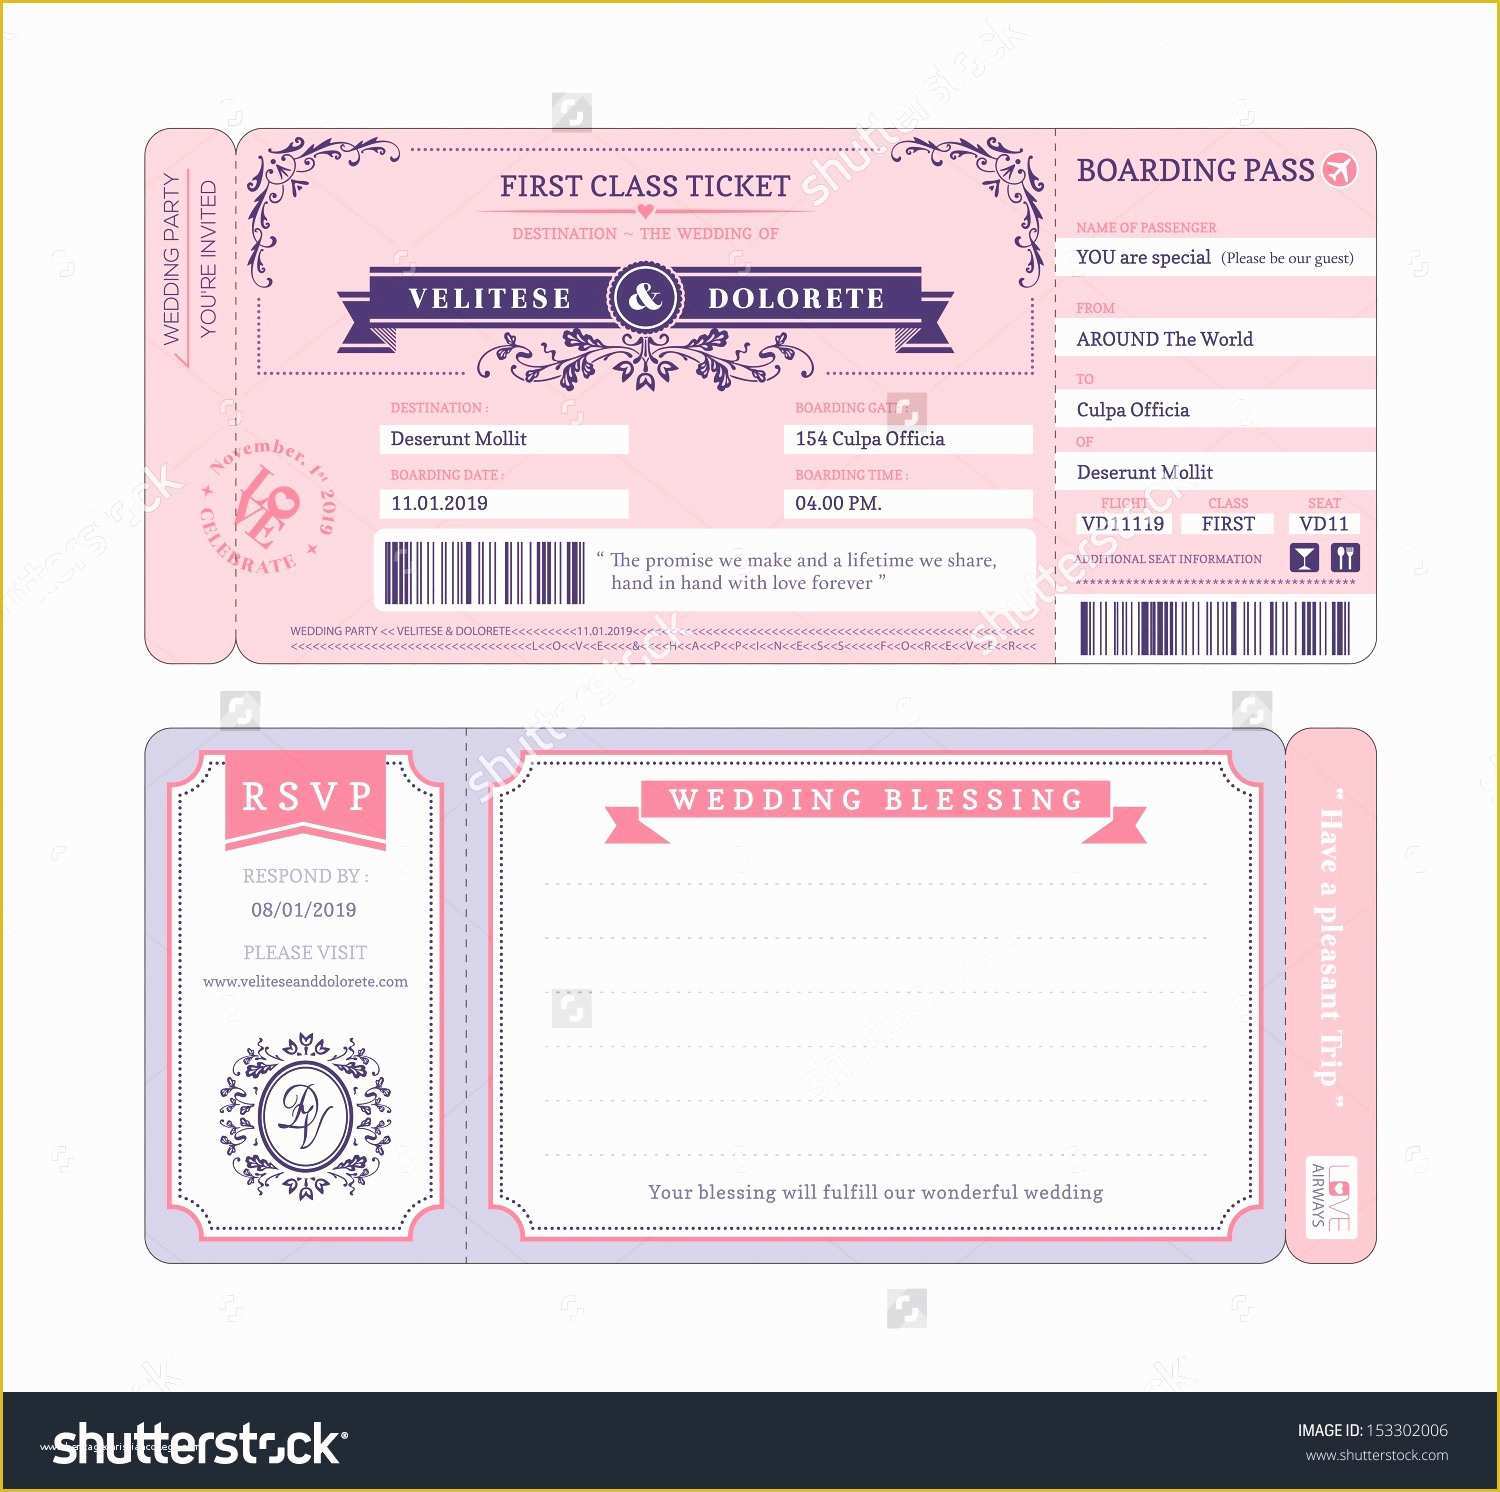 Boarding Pass Invitation Template Free Of Airline Ticket Invitation Example Mughals